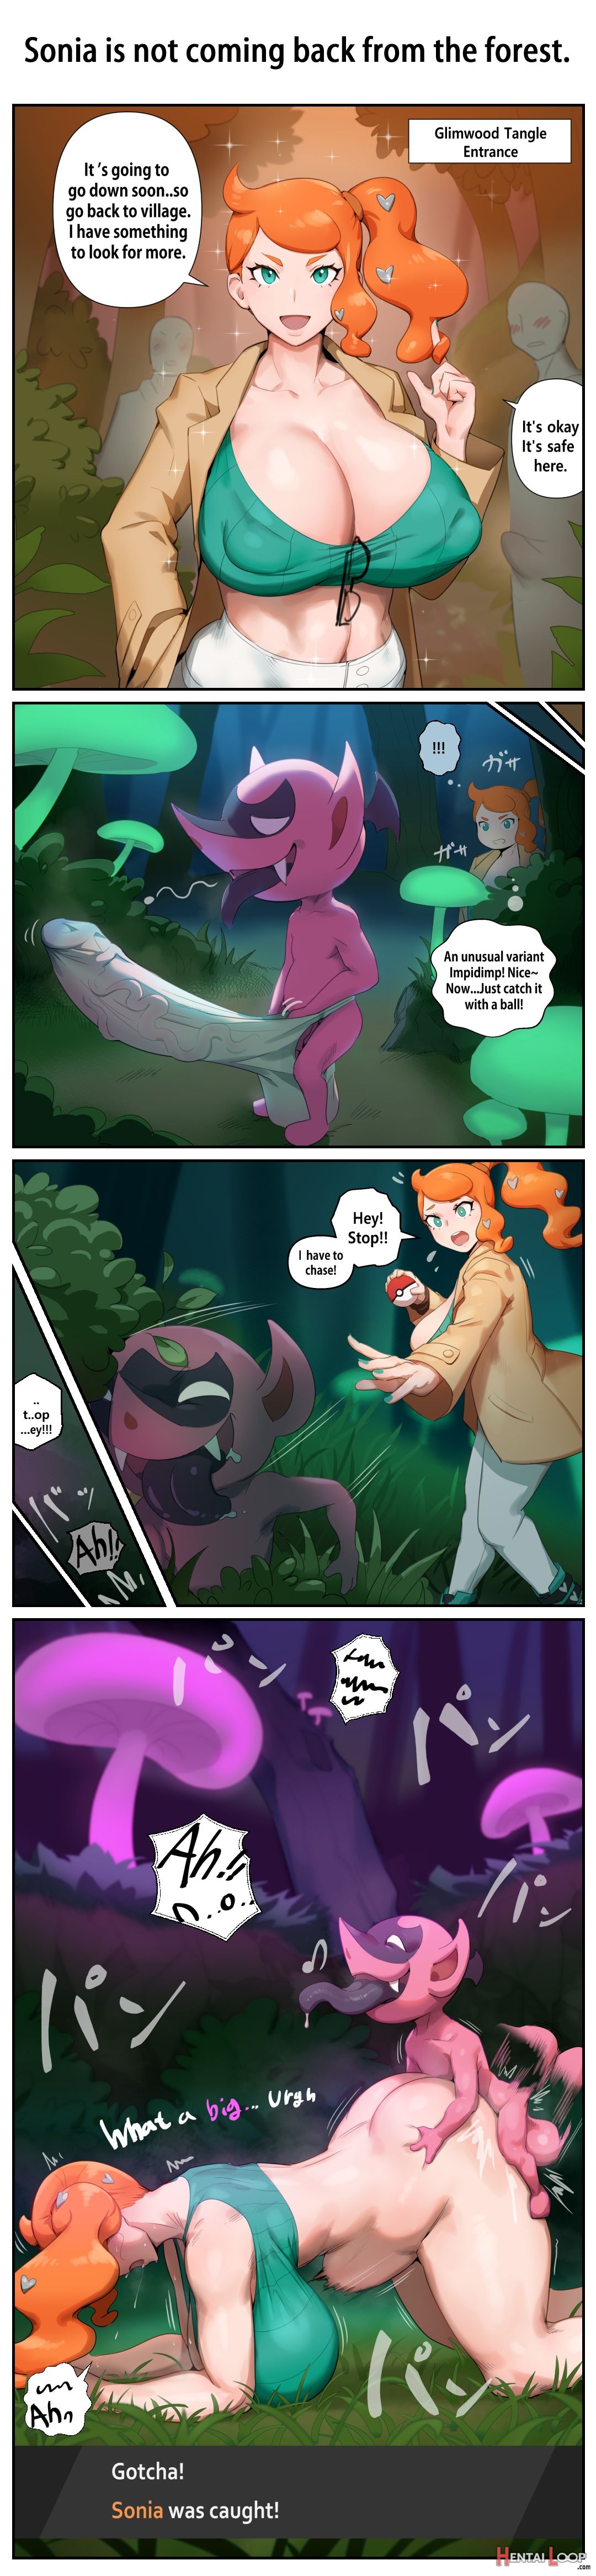 Sonia Does Not Return From The Forest. page 5